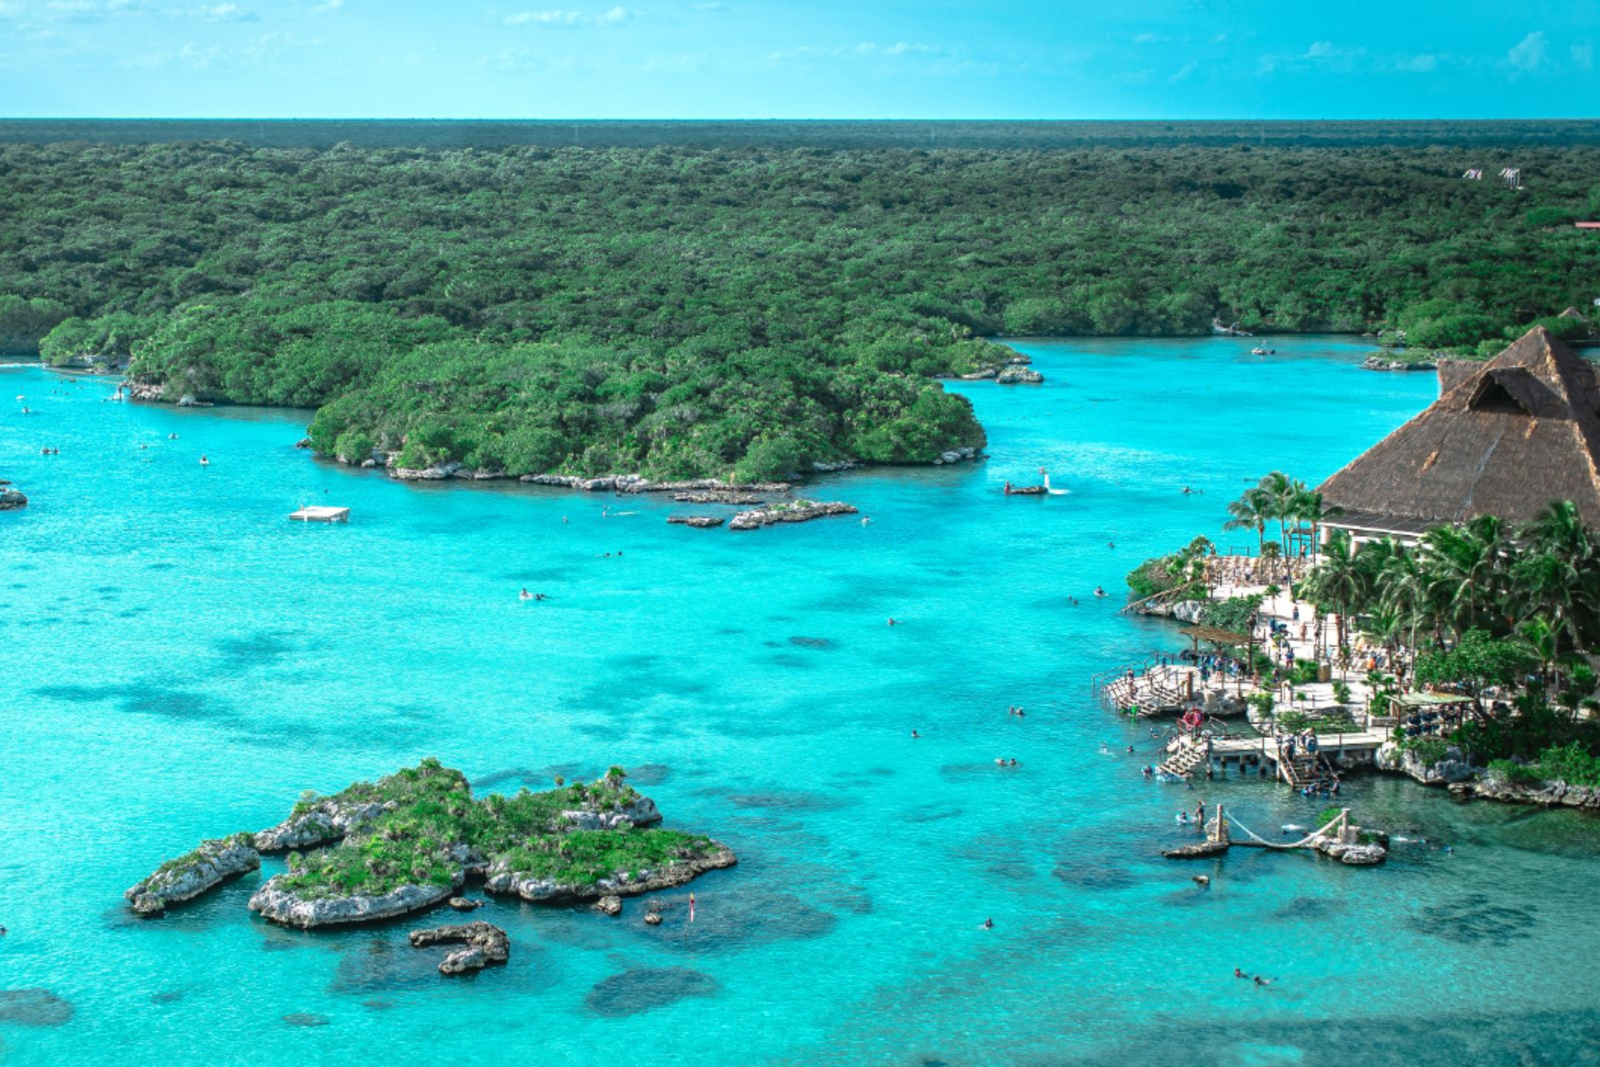 When you stay at Hotel Xcaret México, you get access to a collection of exciting natural theme parks